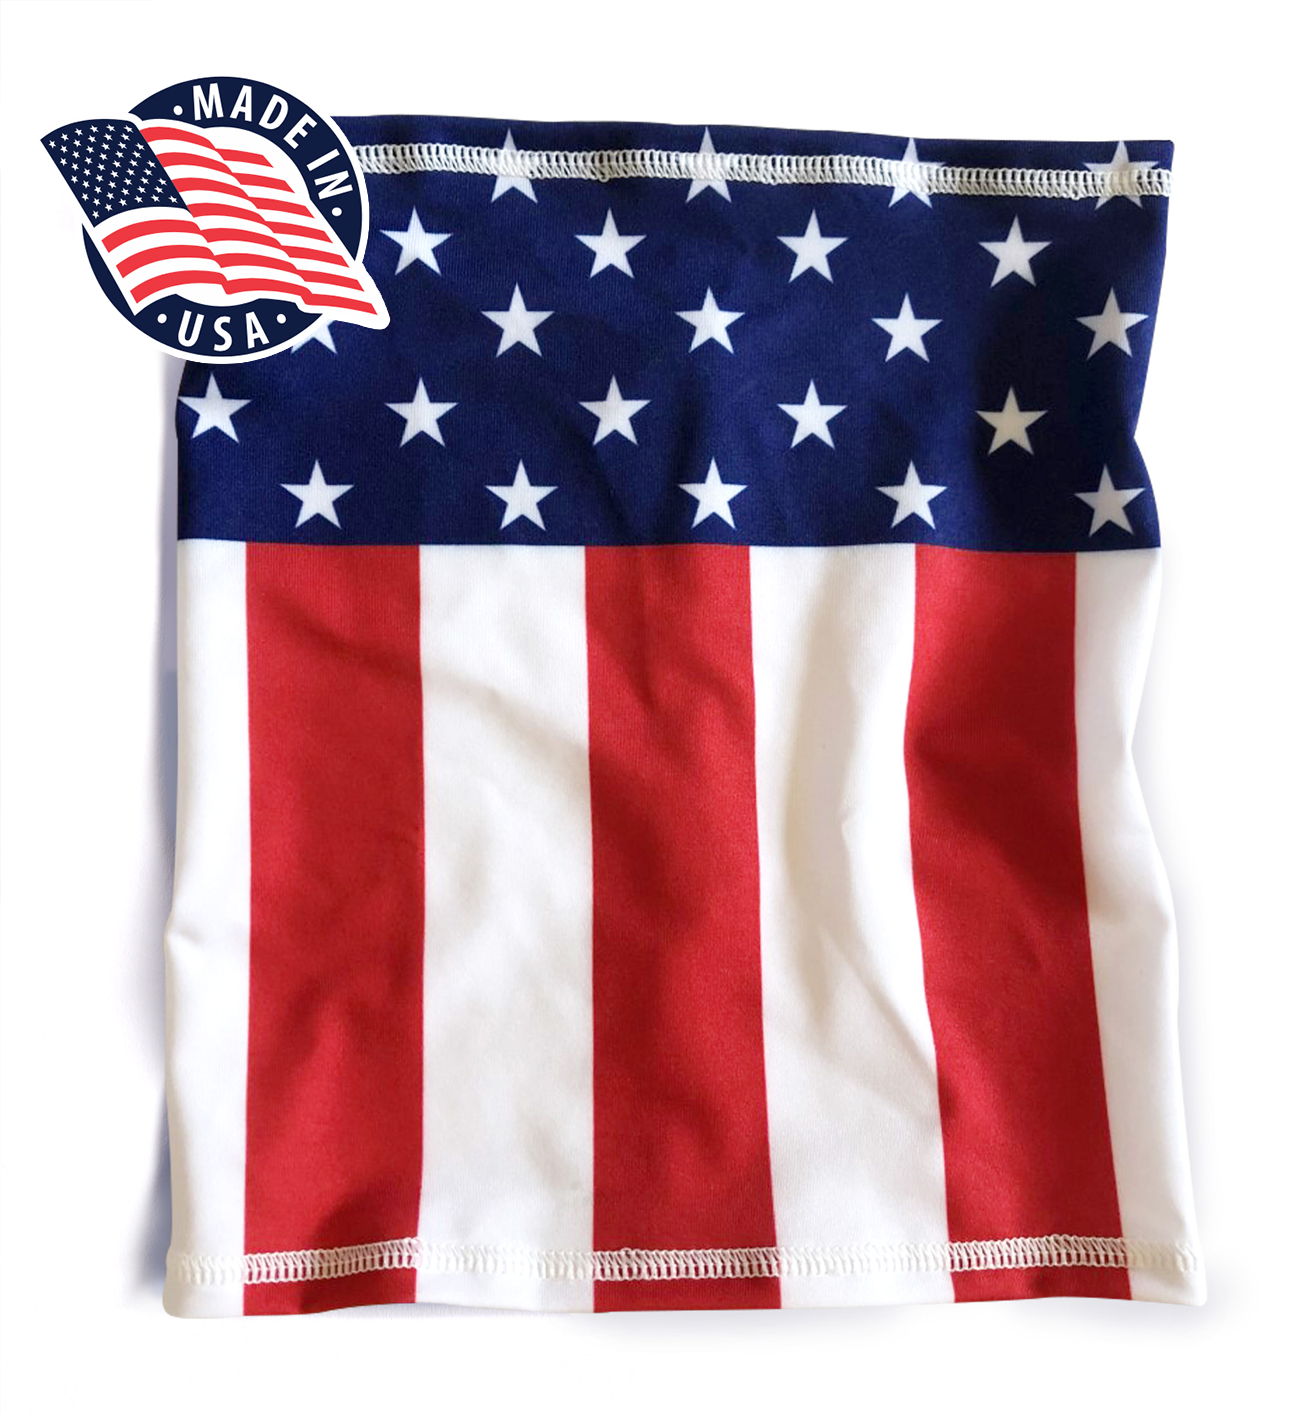 Cooling Compact 6-in-1 Neck Gaiter Neck Gaiters MISSION One Size USA Flag 